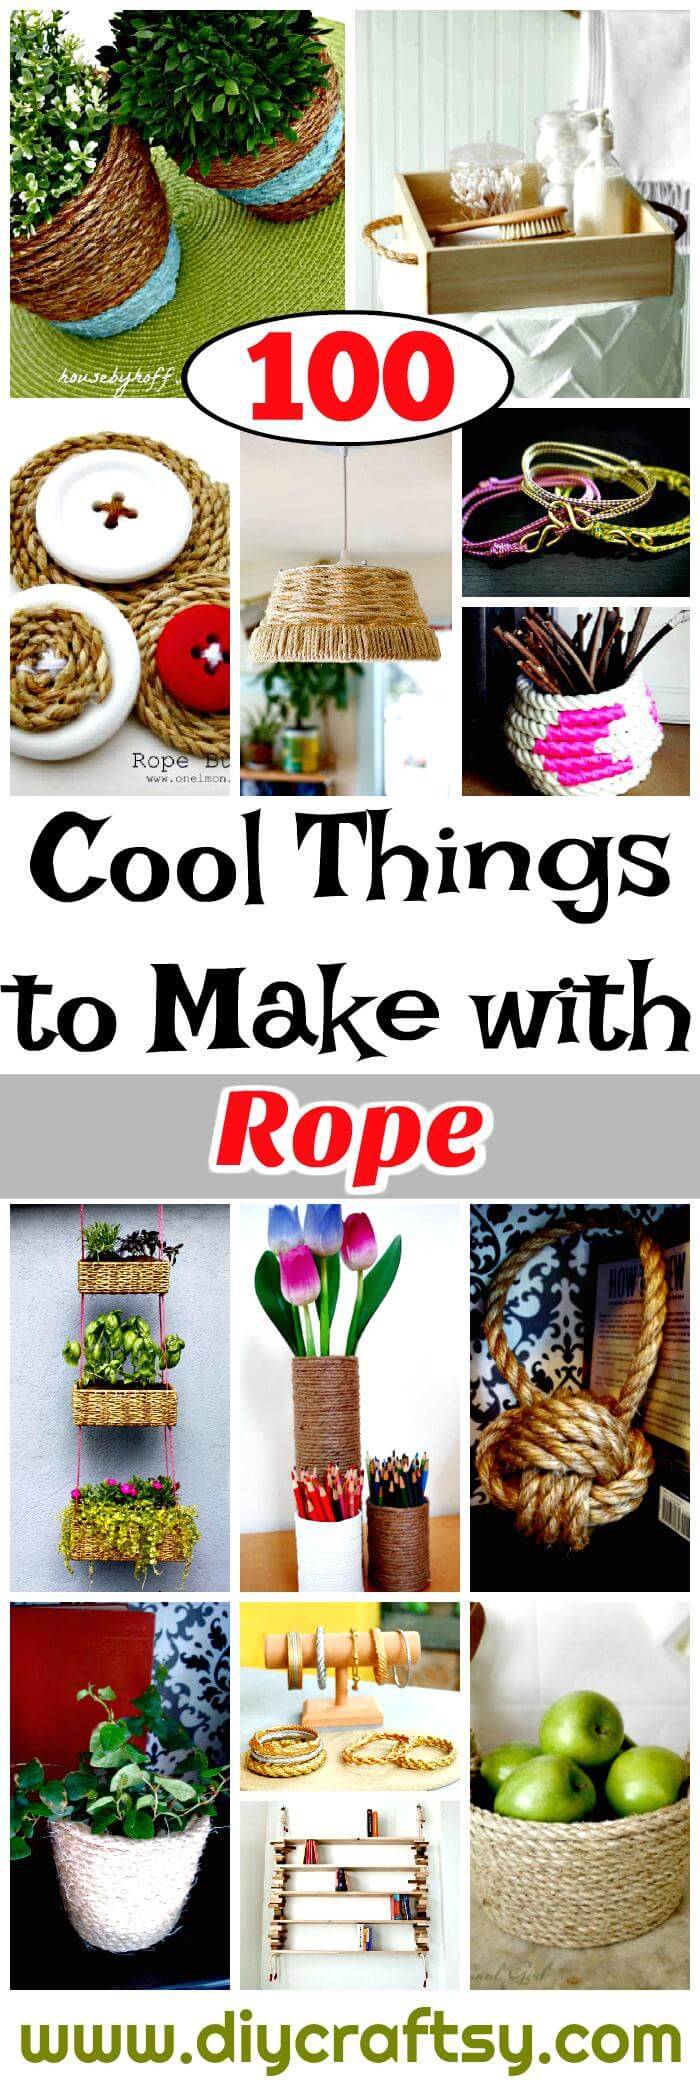 DIY Rope Projects and Crafts